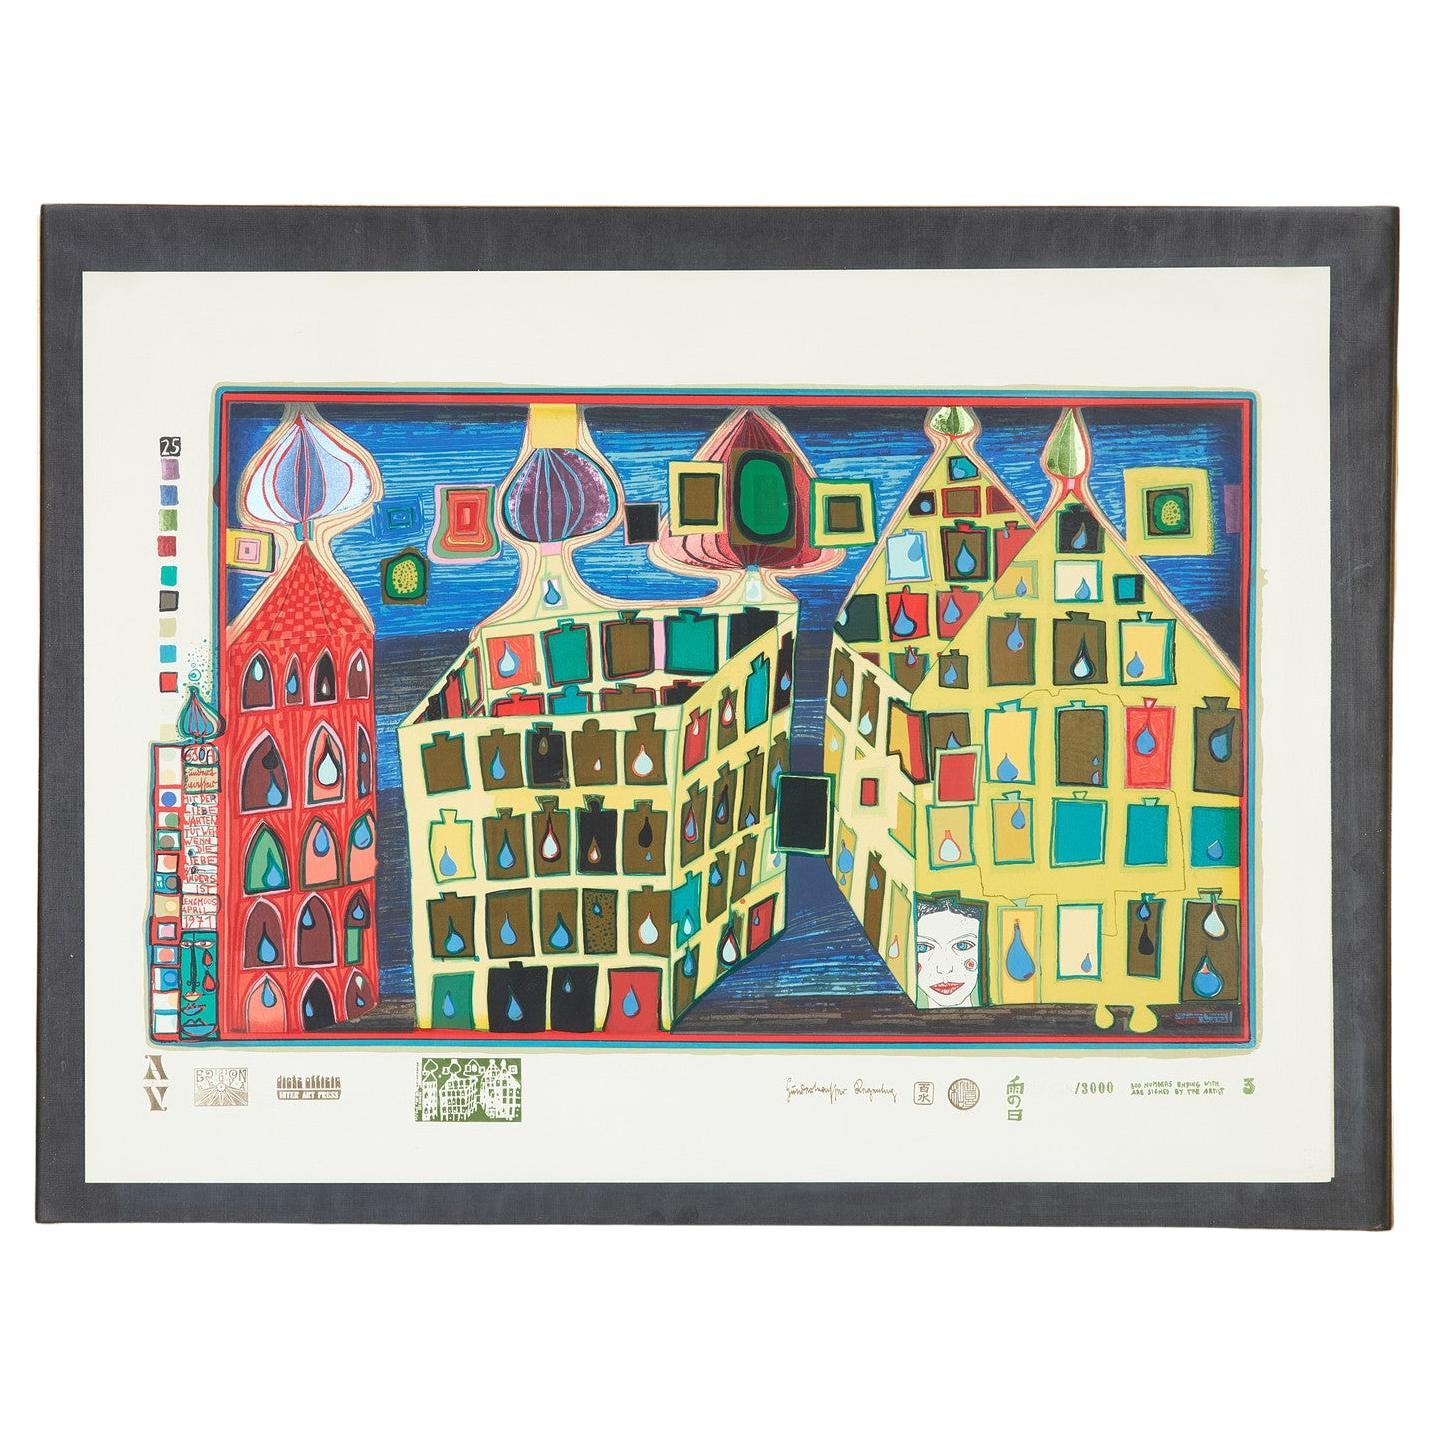 Friedensreich Hundertwasser, color screen print with metal embossing “It hurts to wait with love in somewhere else”. published by Ars Viva, Zurich 1971-72, stamp signed and numbered 858/3000.
Dimensions including frame 60 x 77 cm, print dimensions